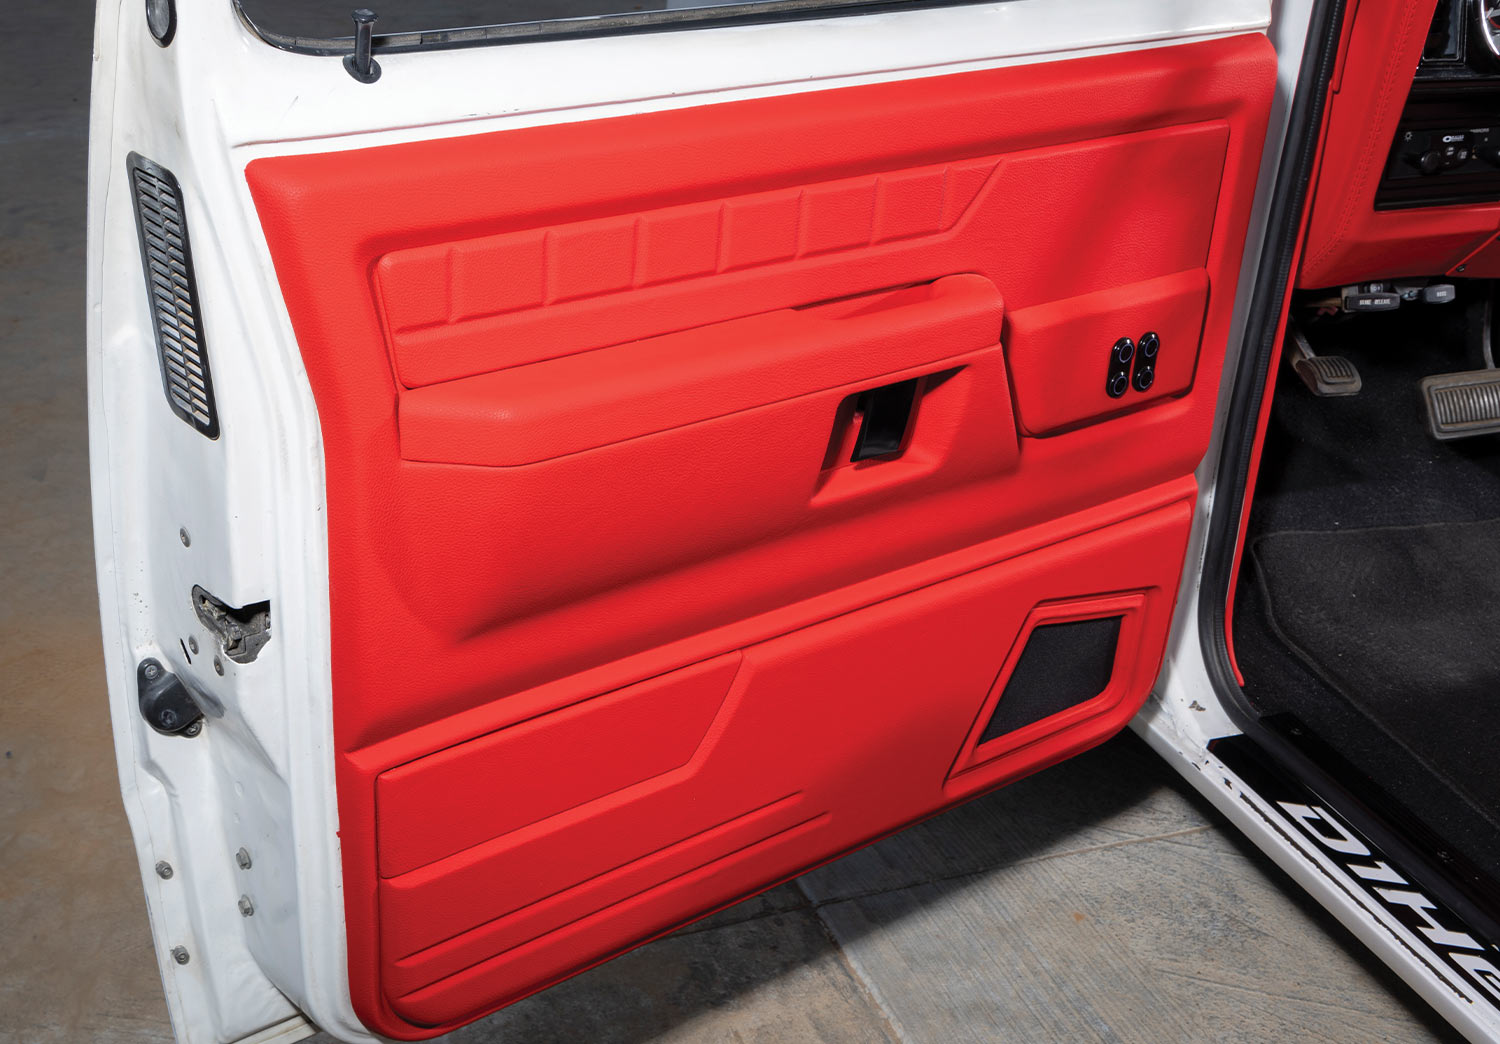 view of the ’89 Dodge Ram D150's open driver side door featuring vibrant red lining